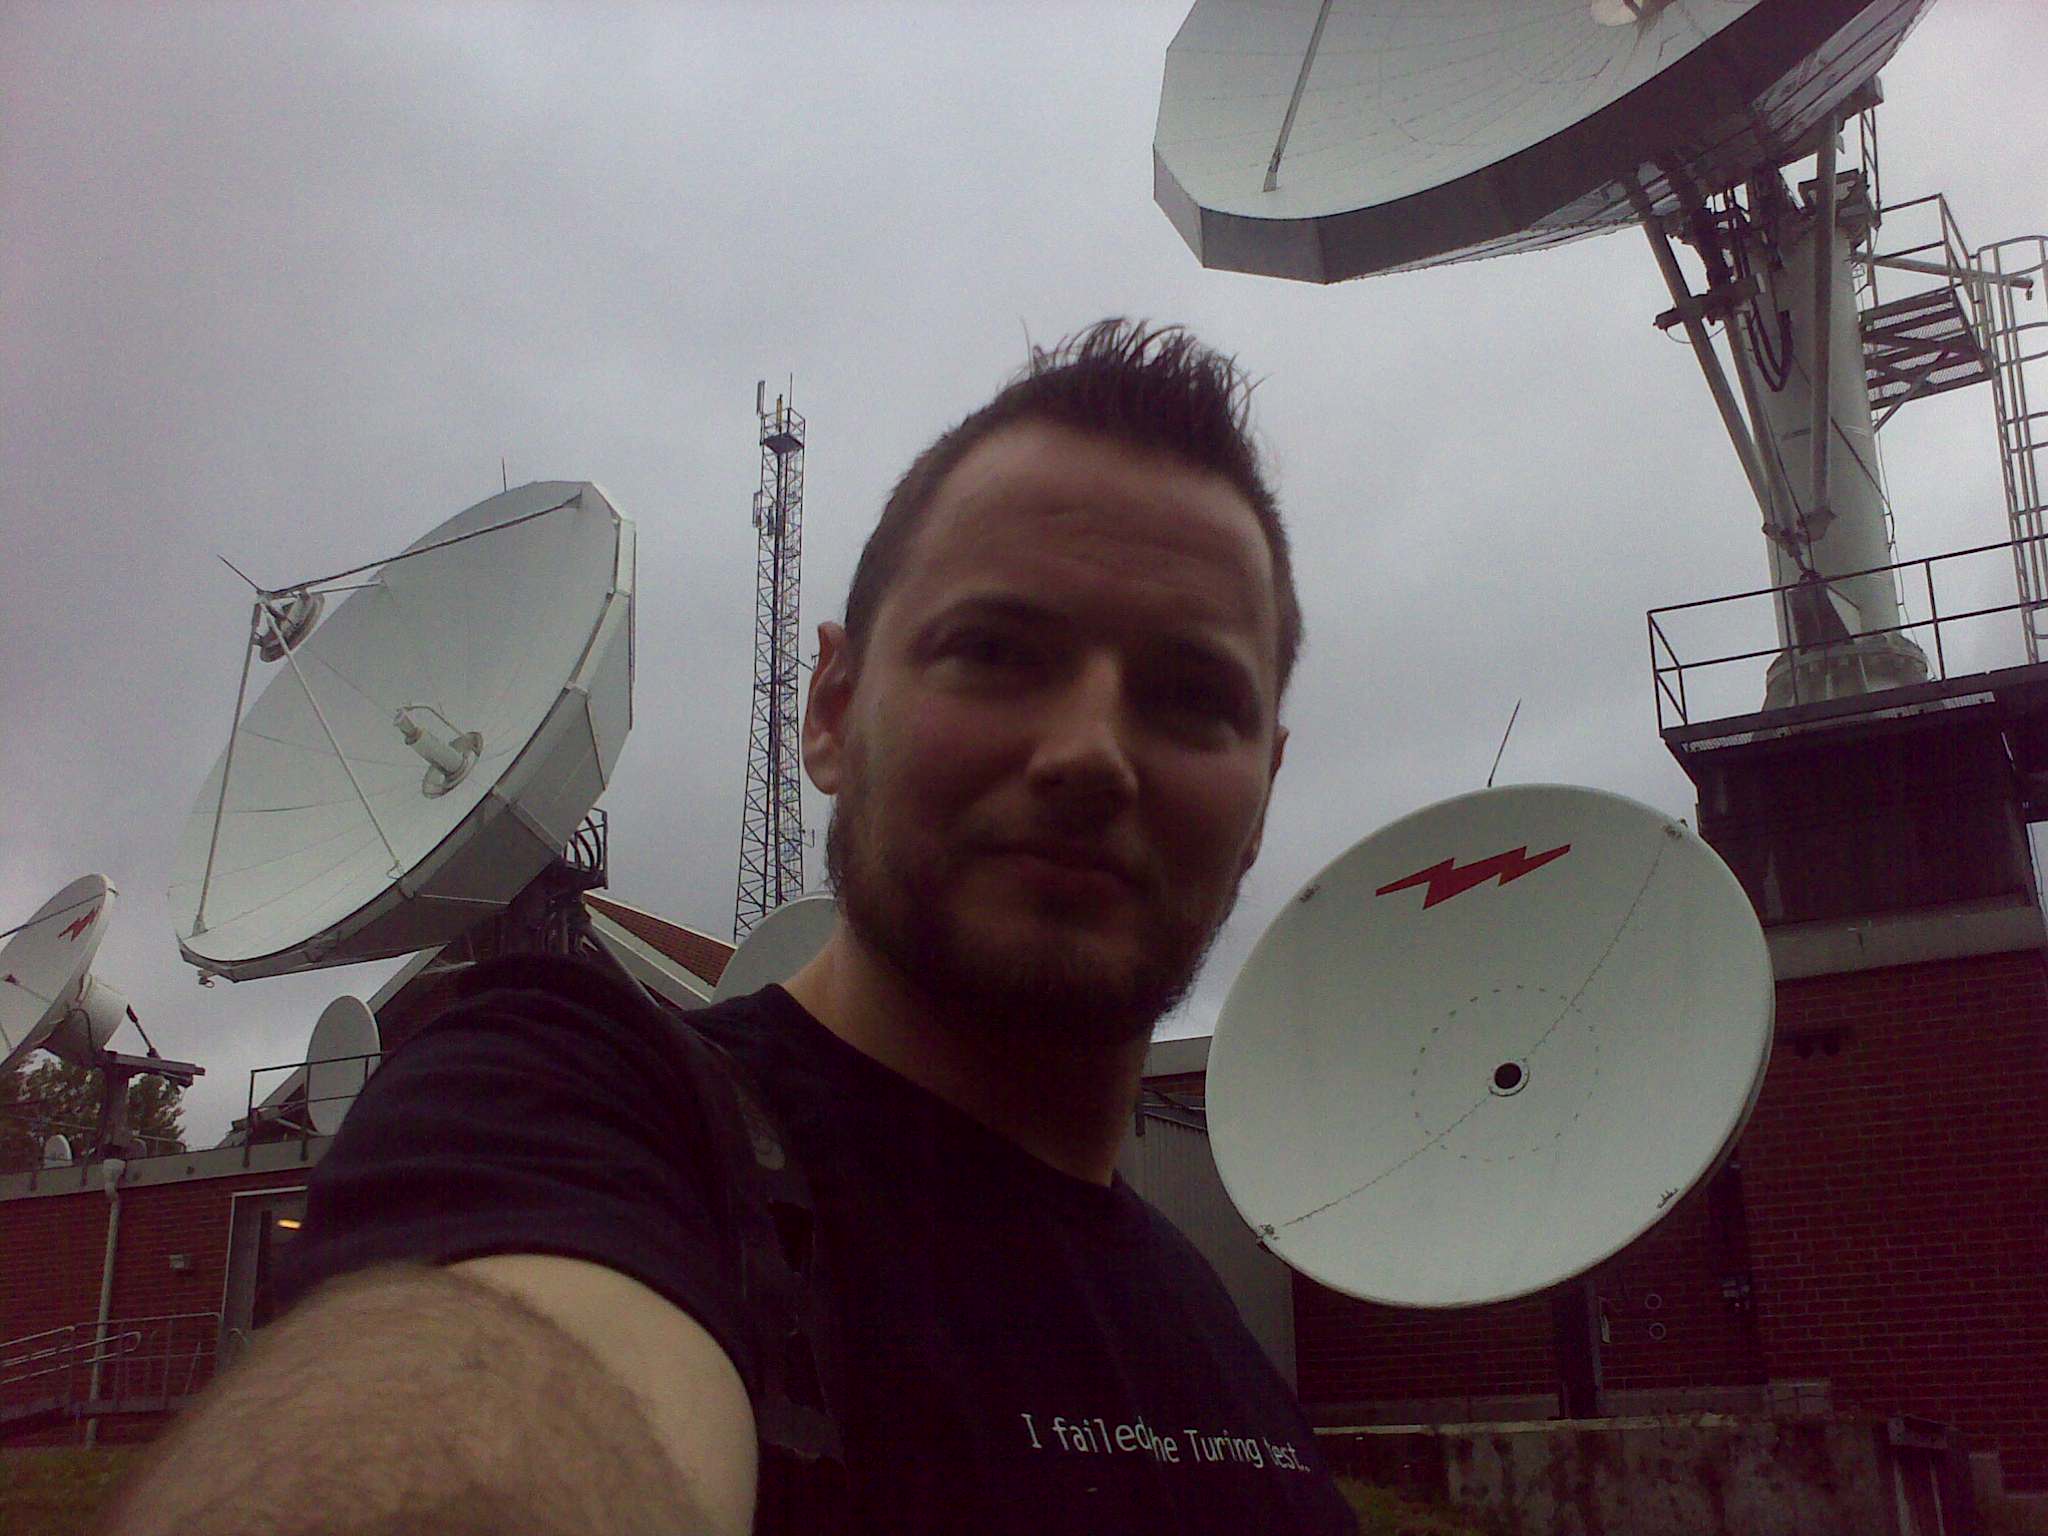 man in a black shirt holding several satellite dishes